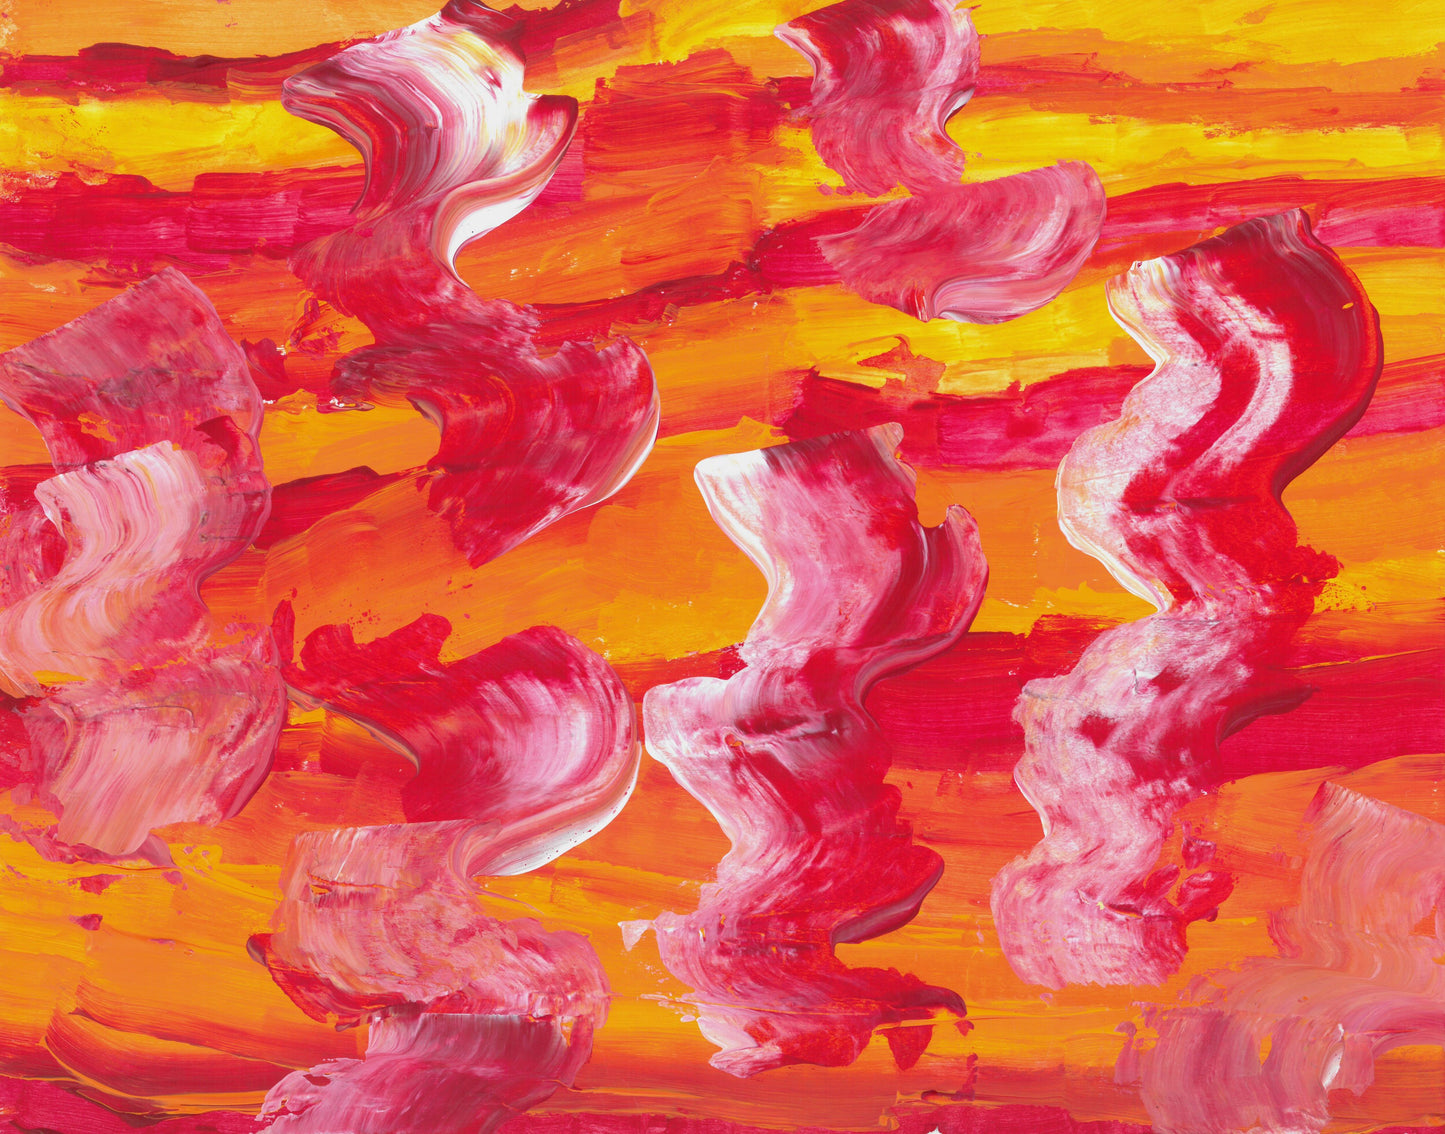 Waves of Fire painting